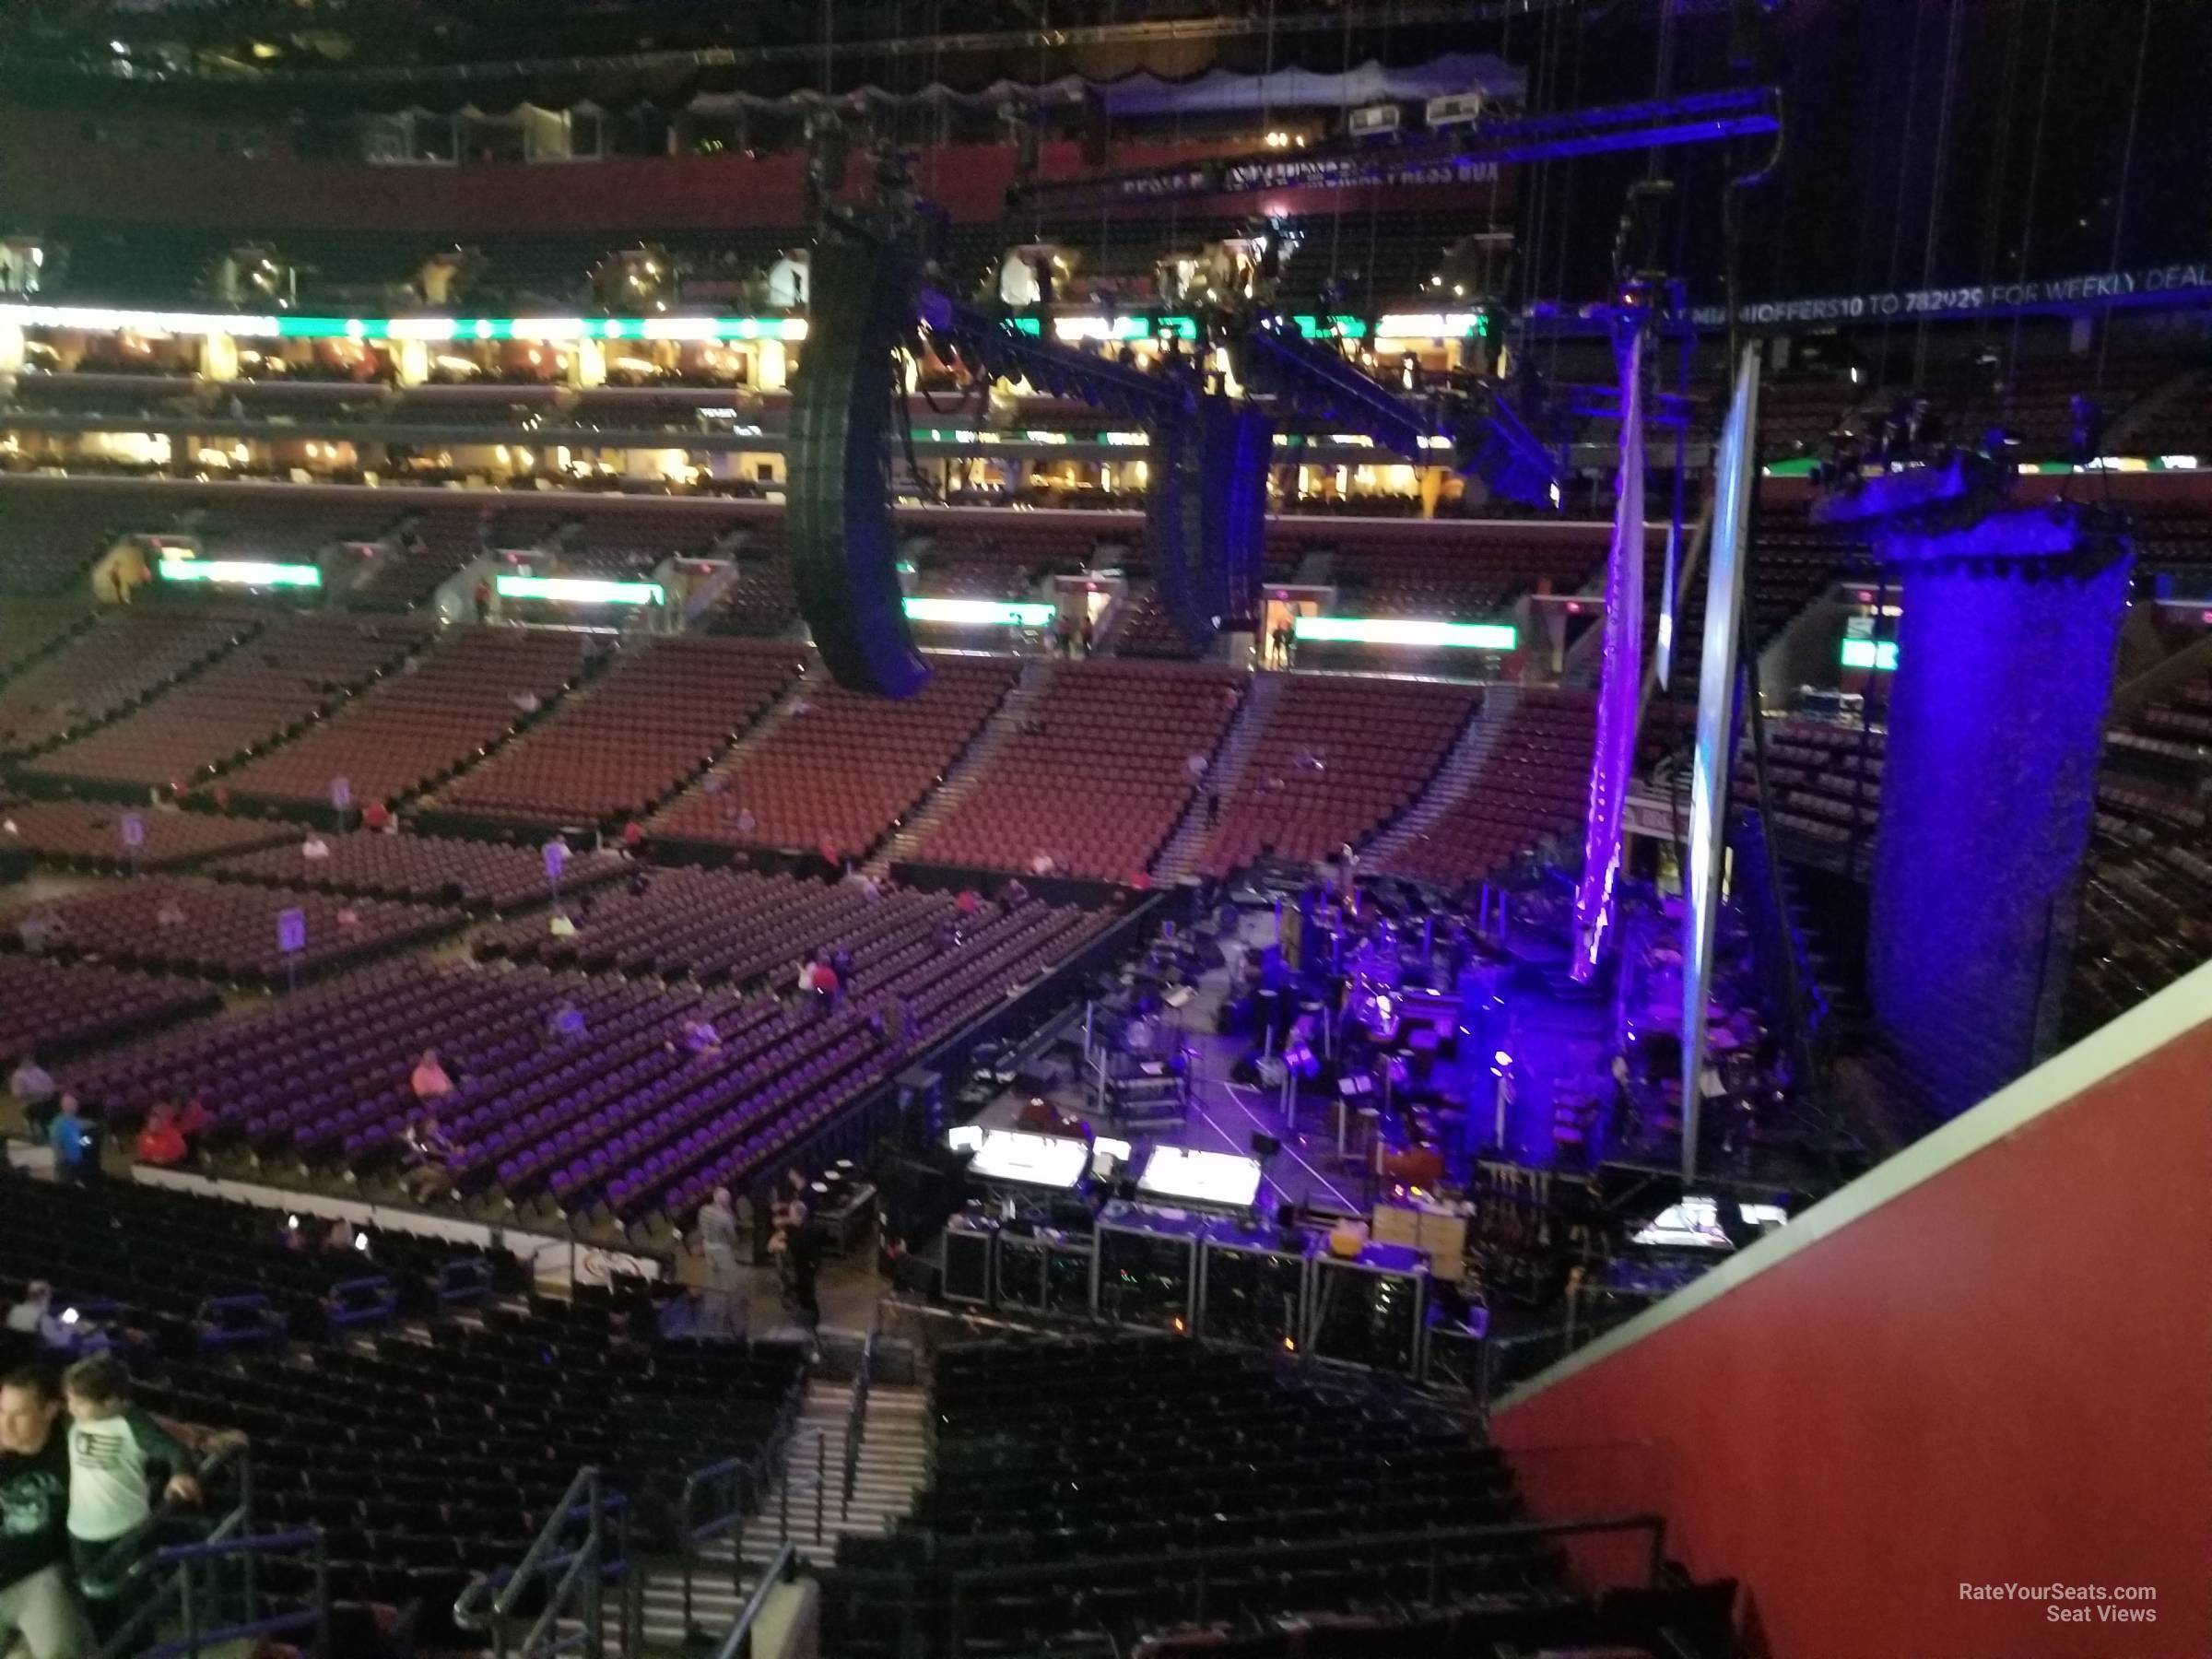 section 131, row 25 seat view  for concert - fla live arena